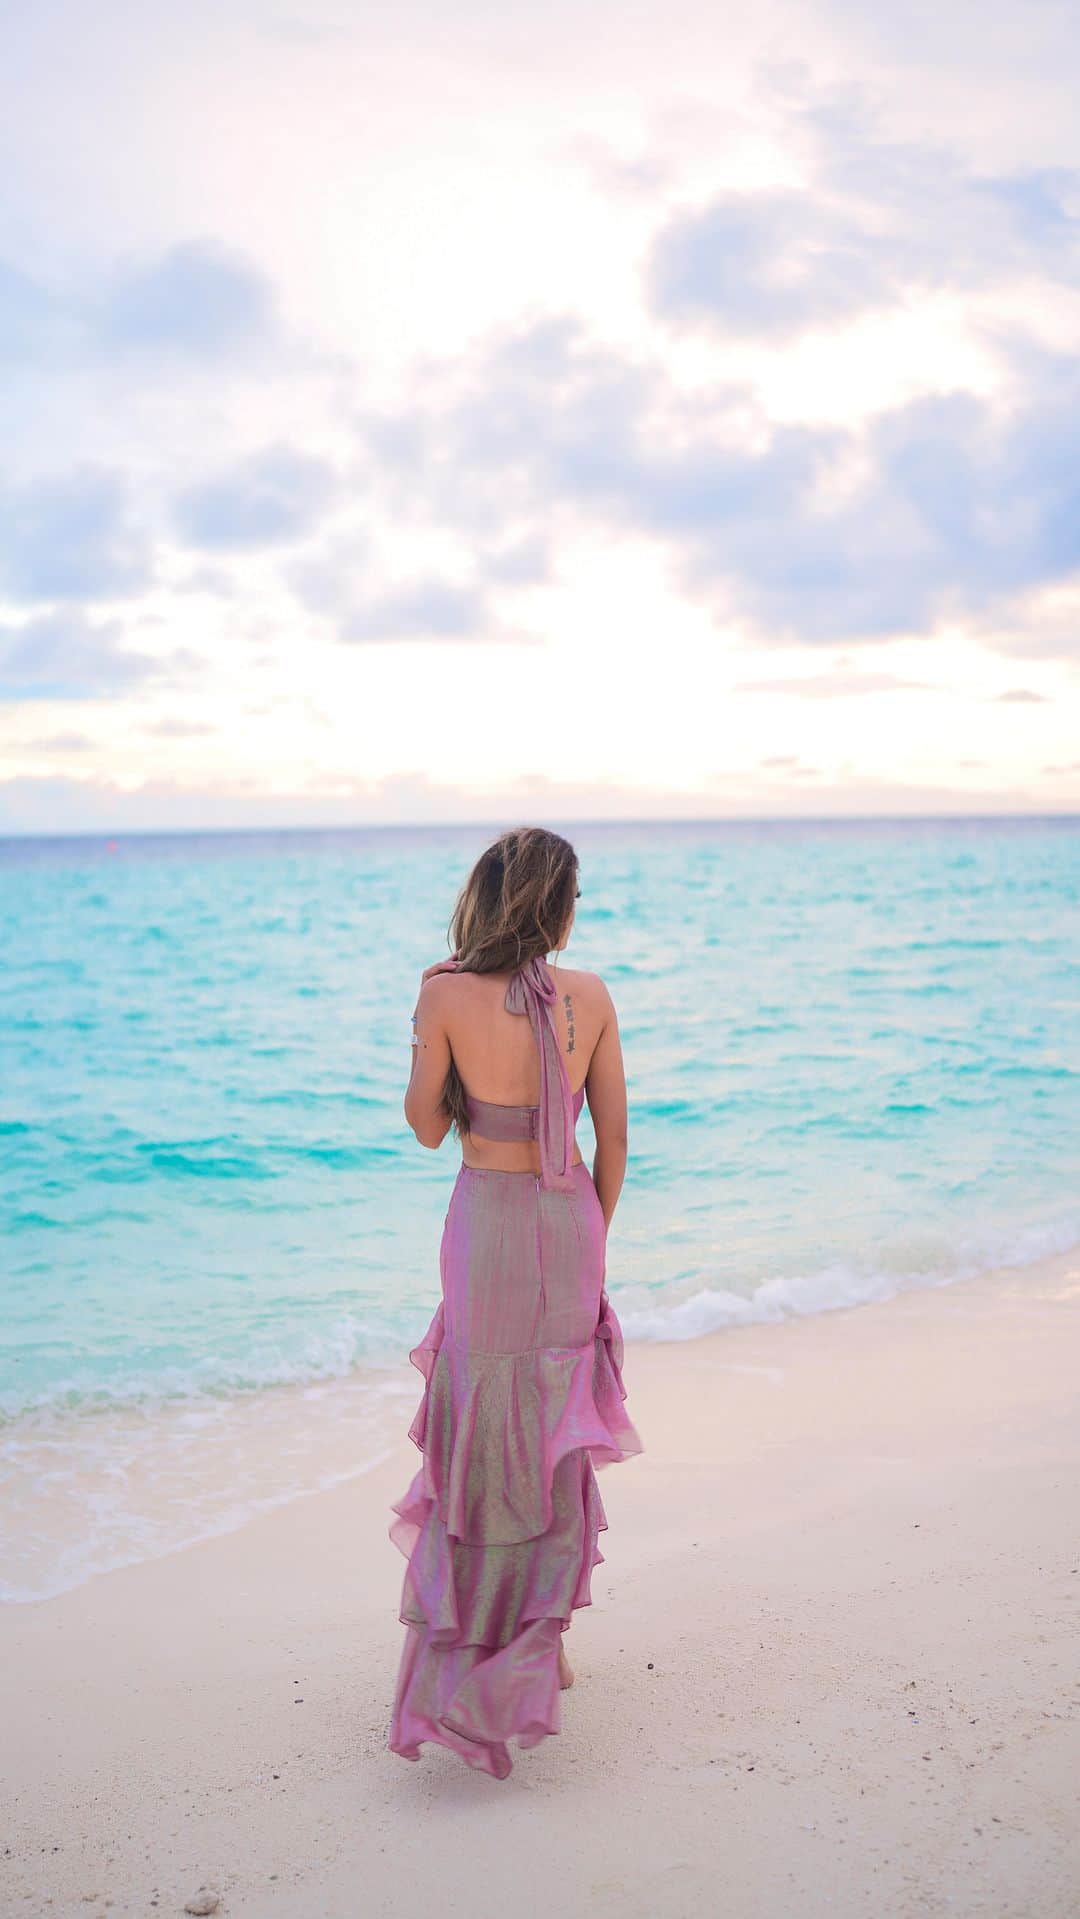 Aakriti Ranaのインスタグラム：「Everyone around me told me that I was looking like a mermaid in this dress haha. 🧜‍♀️  Outfit from @amrtaofficial   #aakritirana #maldives #ootd #outfitoftheday #outfitinspo #mermaid #lookbook #maldivesislands #fashion #trending #reelsinstagram #barbie」